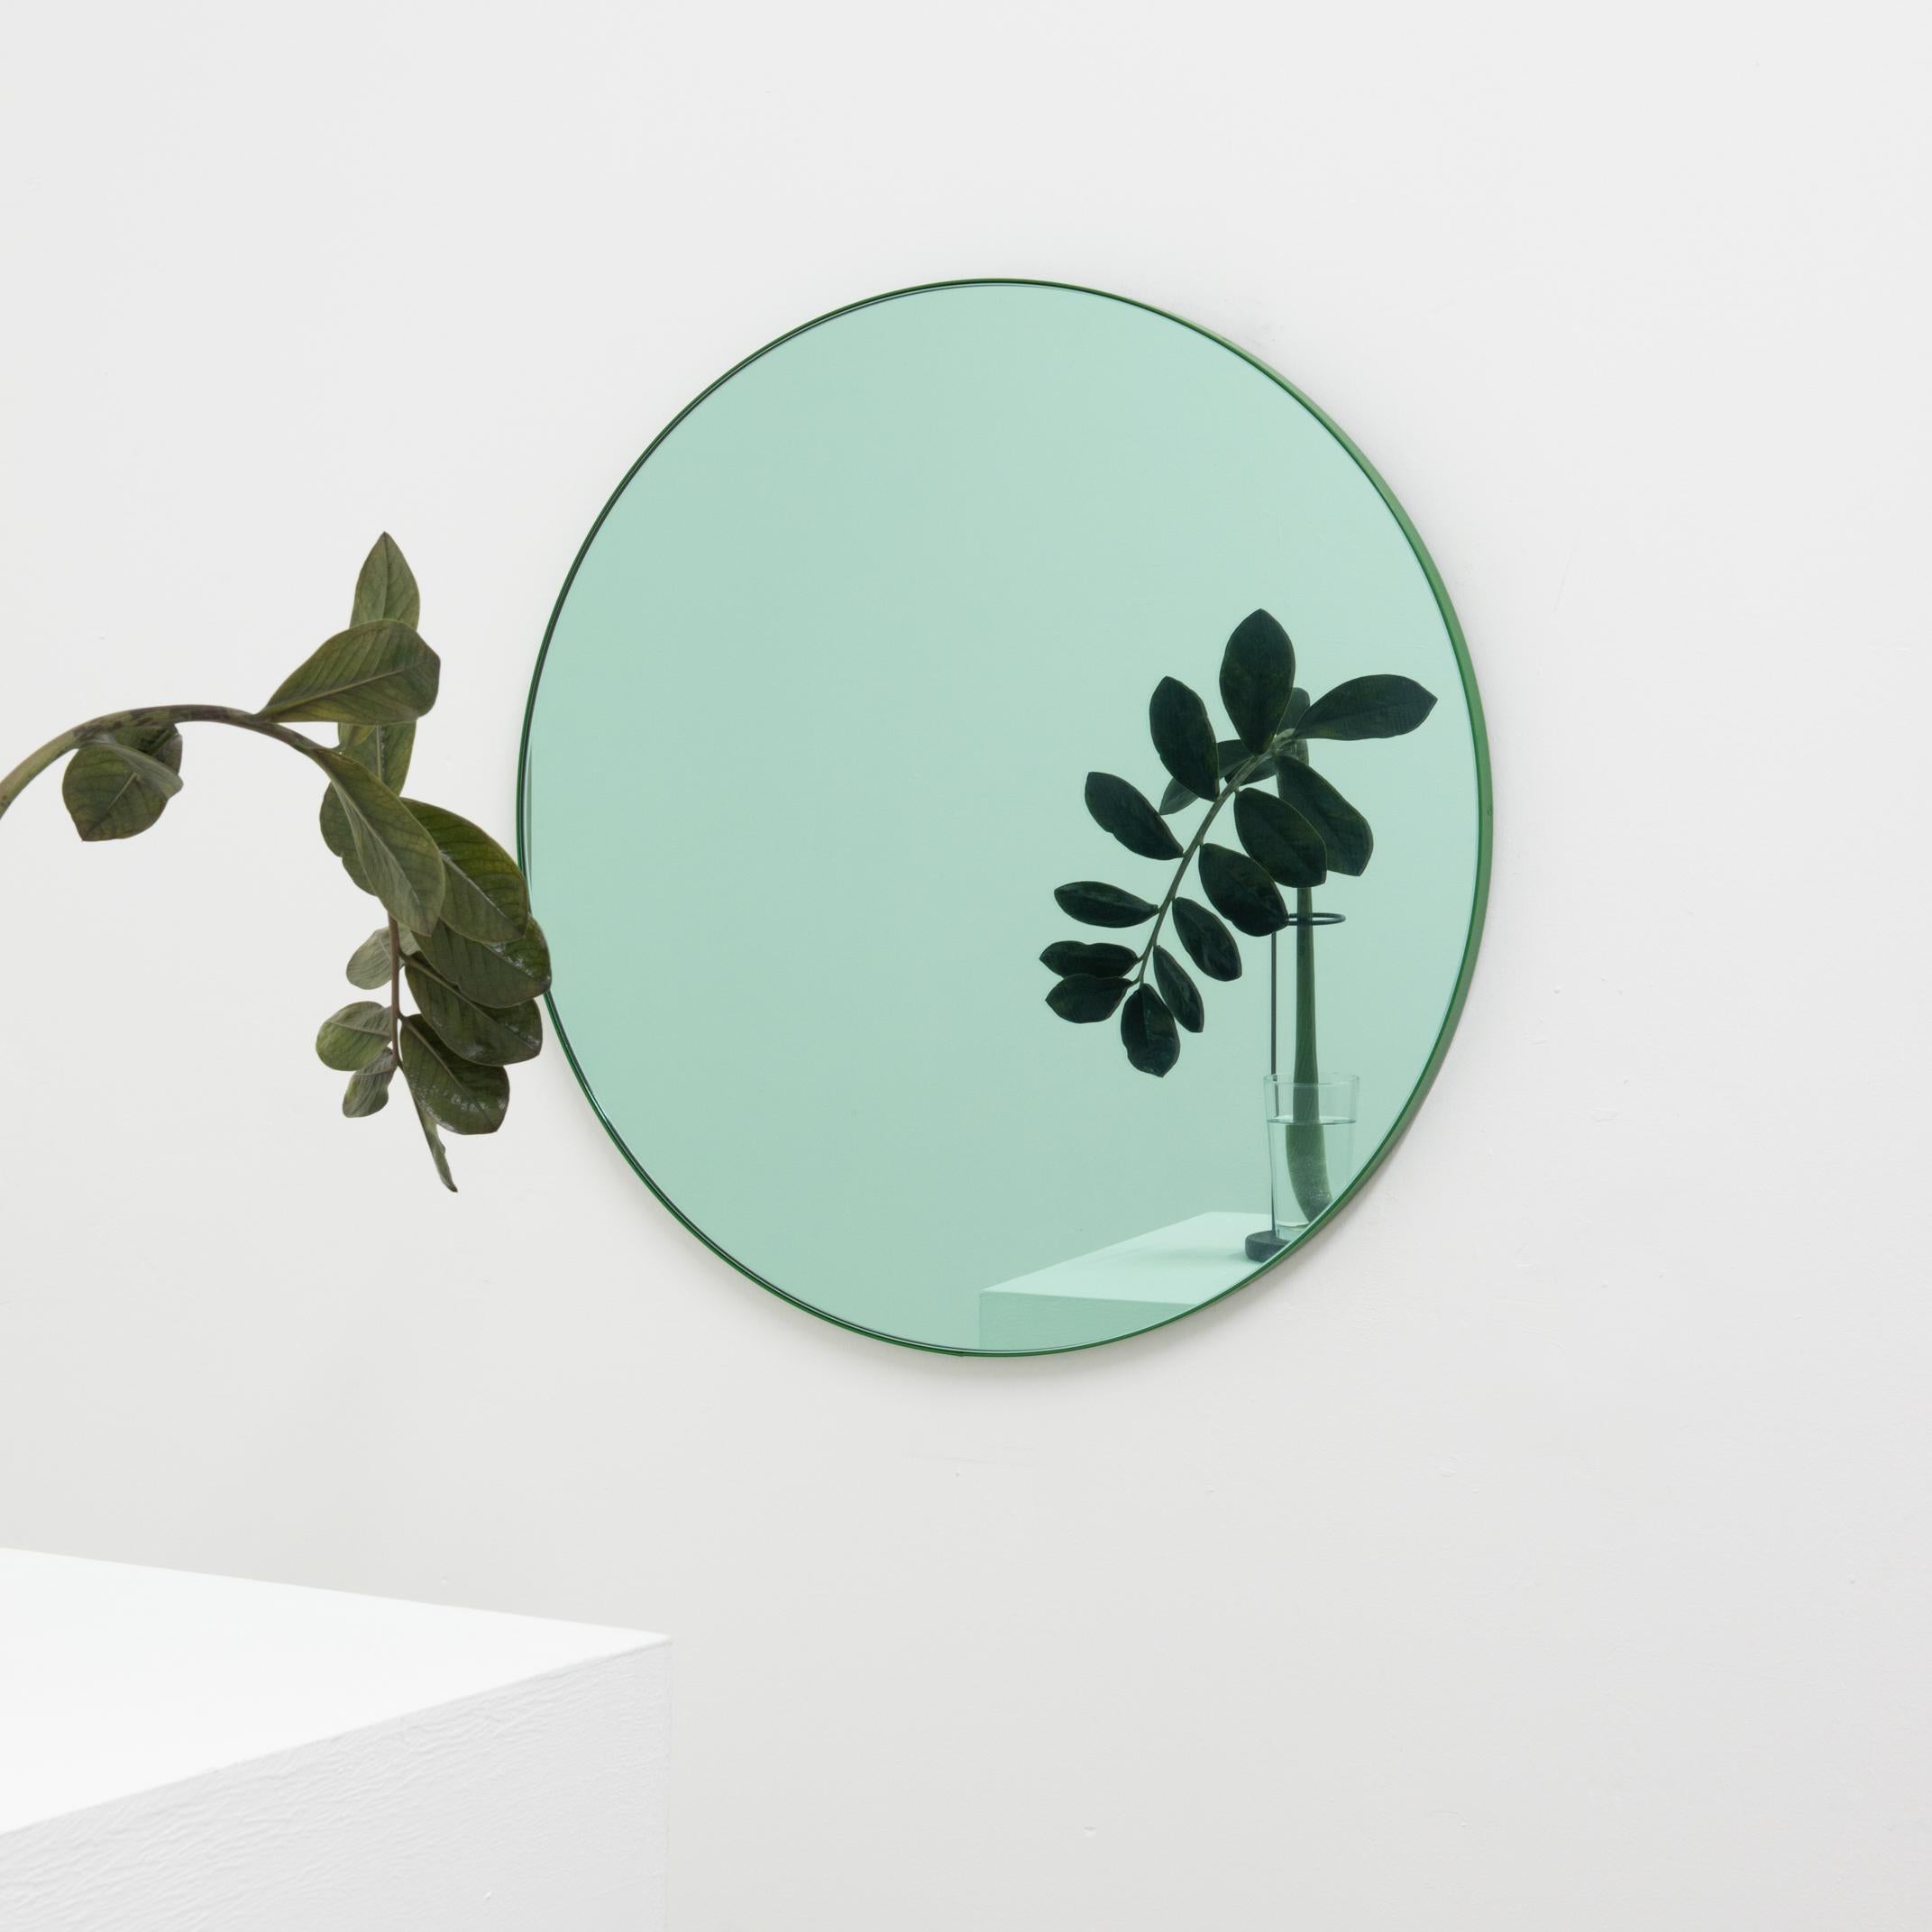 Powder-Coated Orbis Green Tinted Customisable Round Mirror with Green Frame, Small